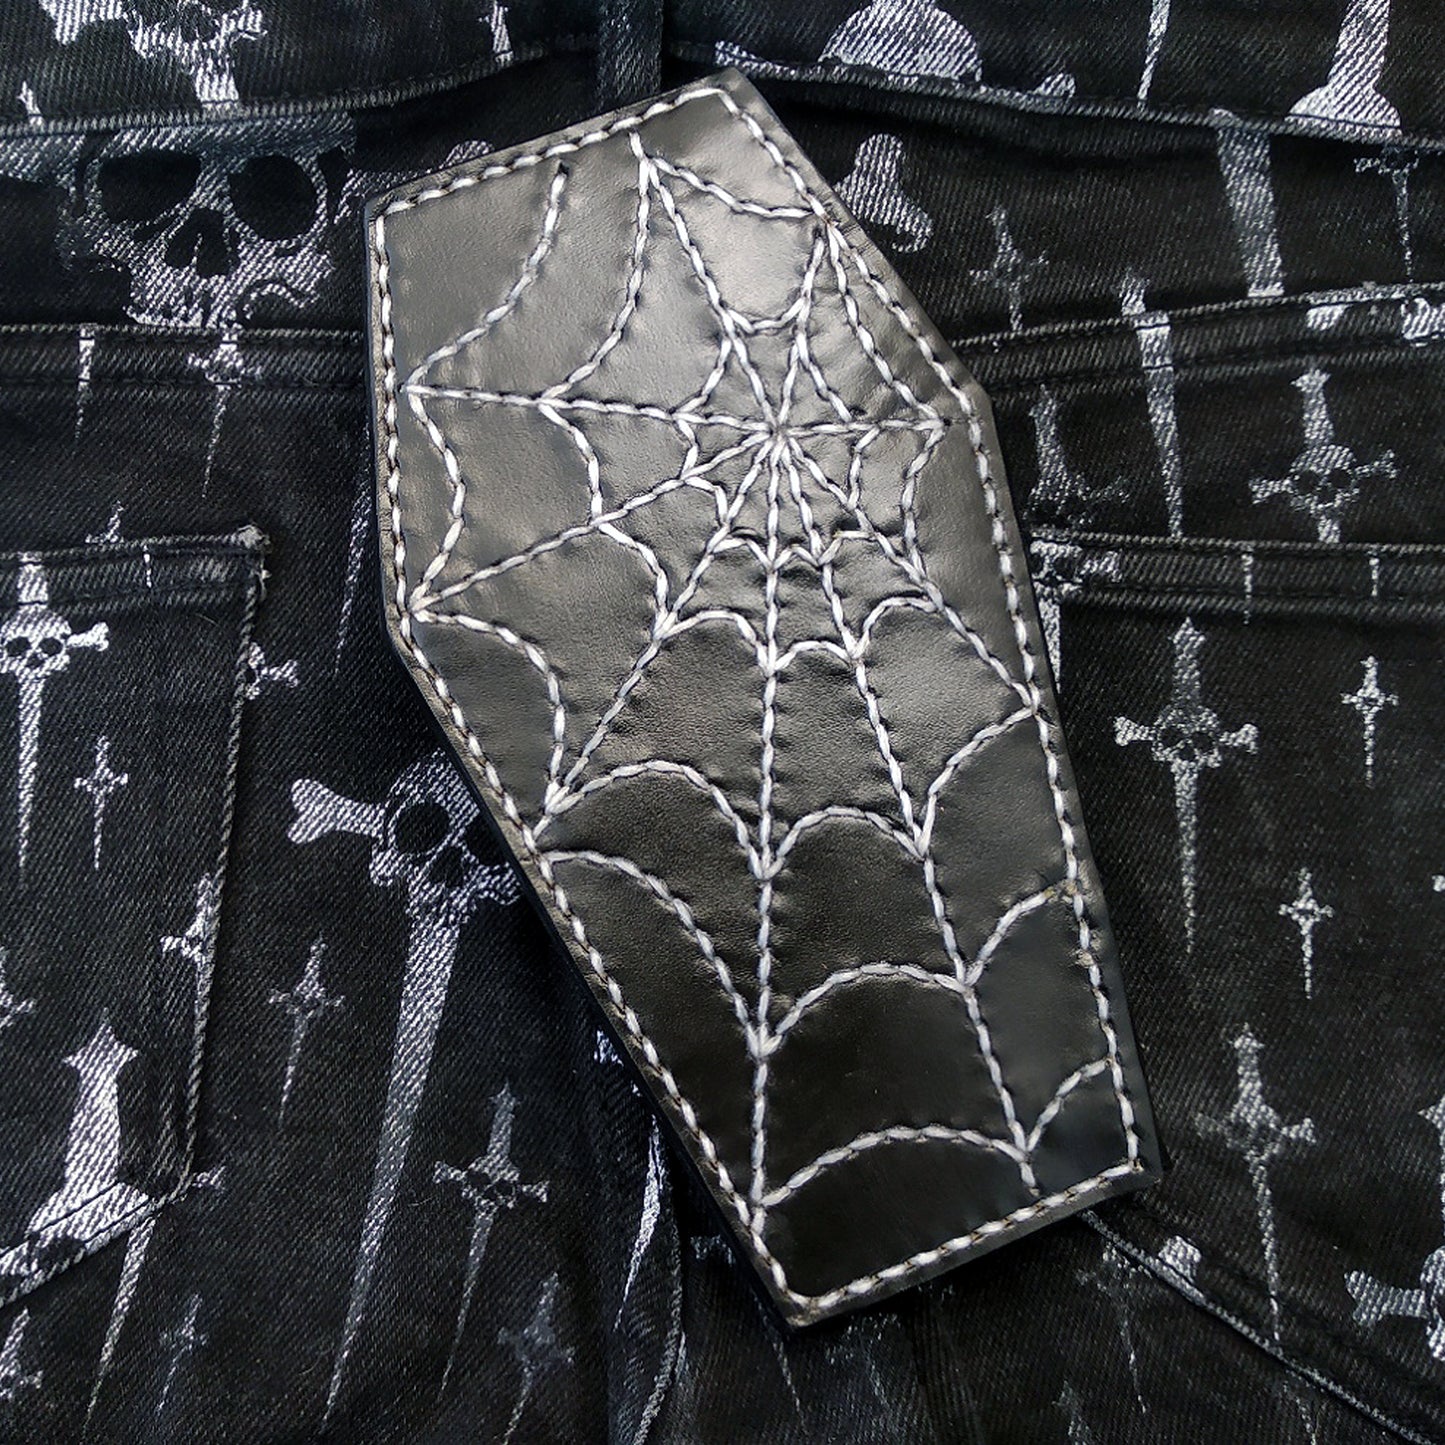 Cow leather wallet style biker coffin spider web by Another Way of Life